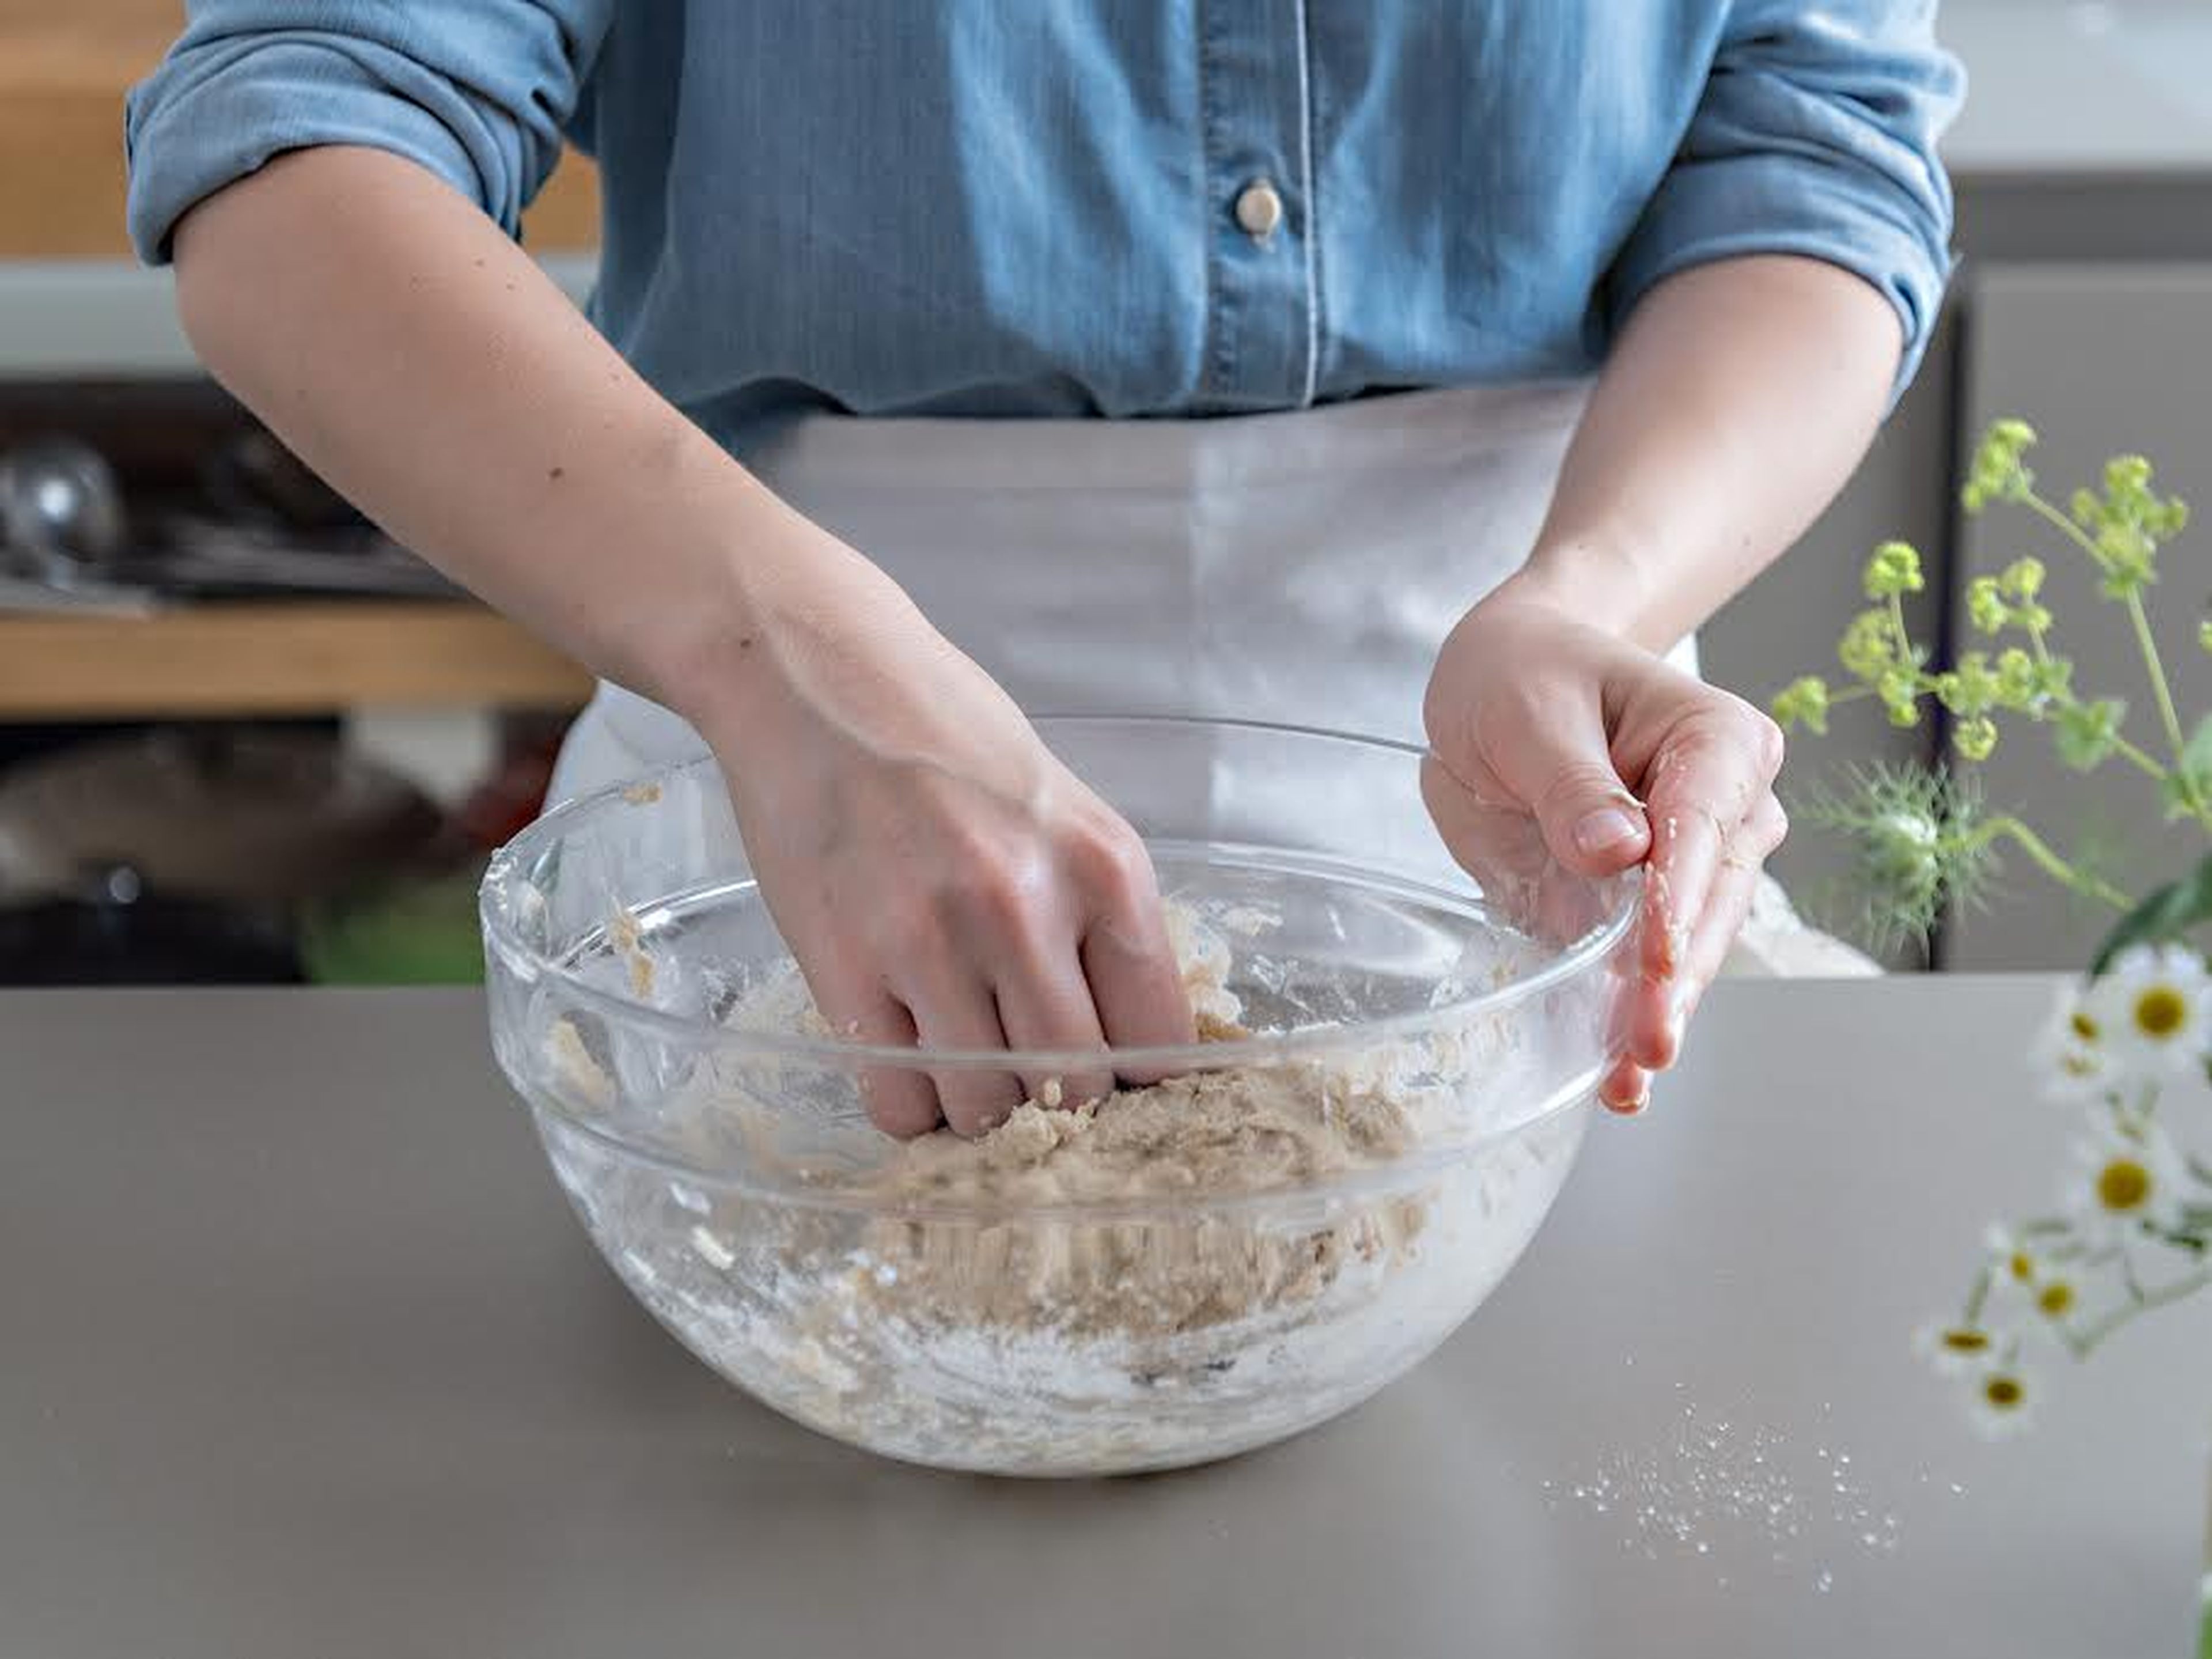 Mix flour, some sugar, and salt in a large mixing bowl. Cut butter into cubes, and work into flour mixture until large crumbs form. Add water a little at a time, and continue to mix until a smooth dough forms. Wrap dough tightly in plastic wrap and refrigerate for at least 2 hrs.